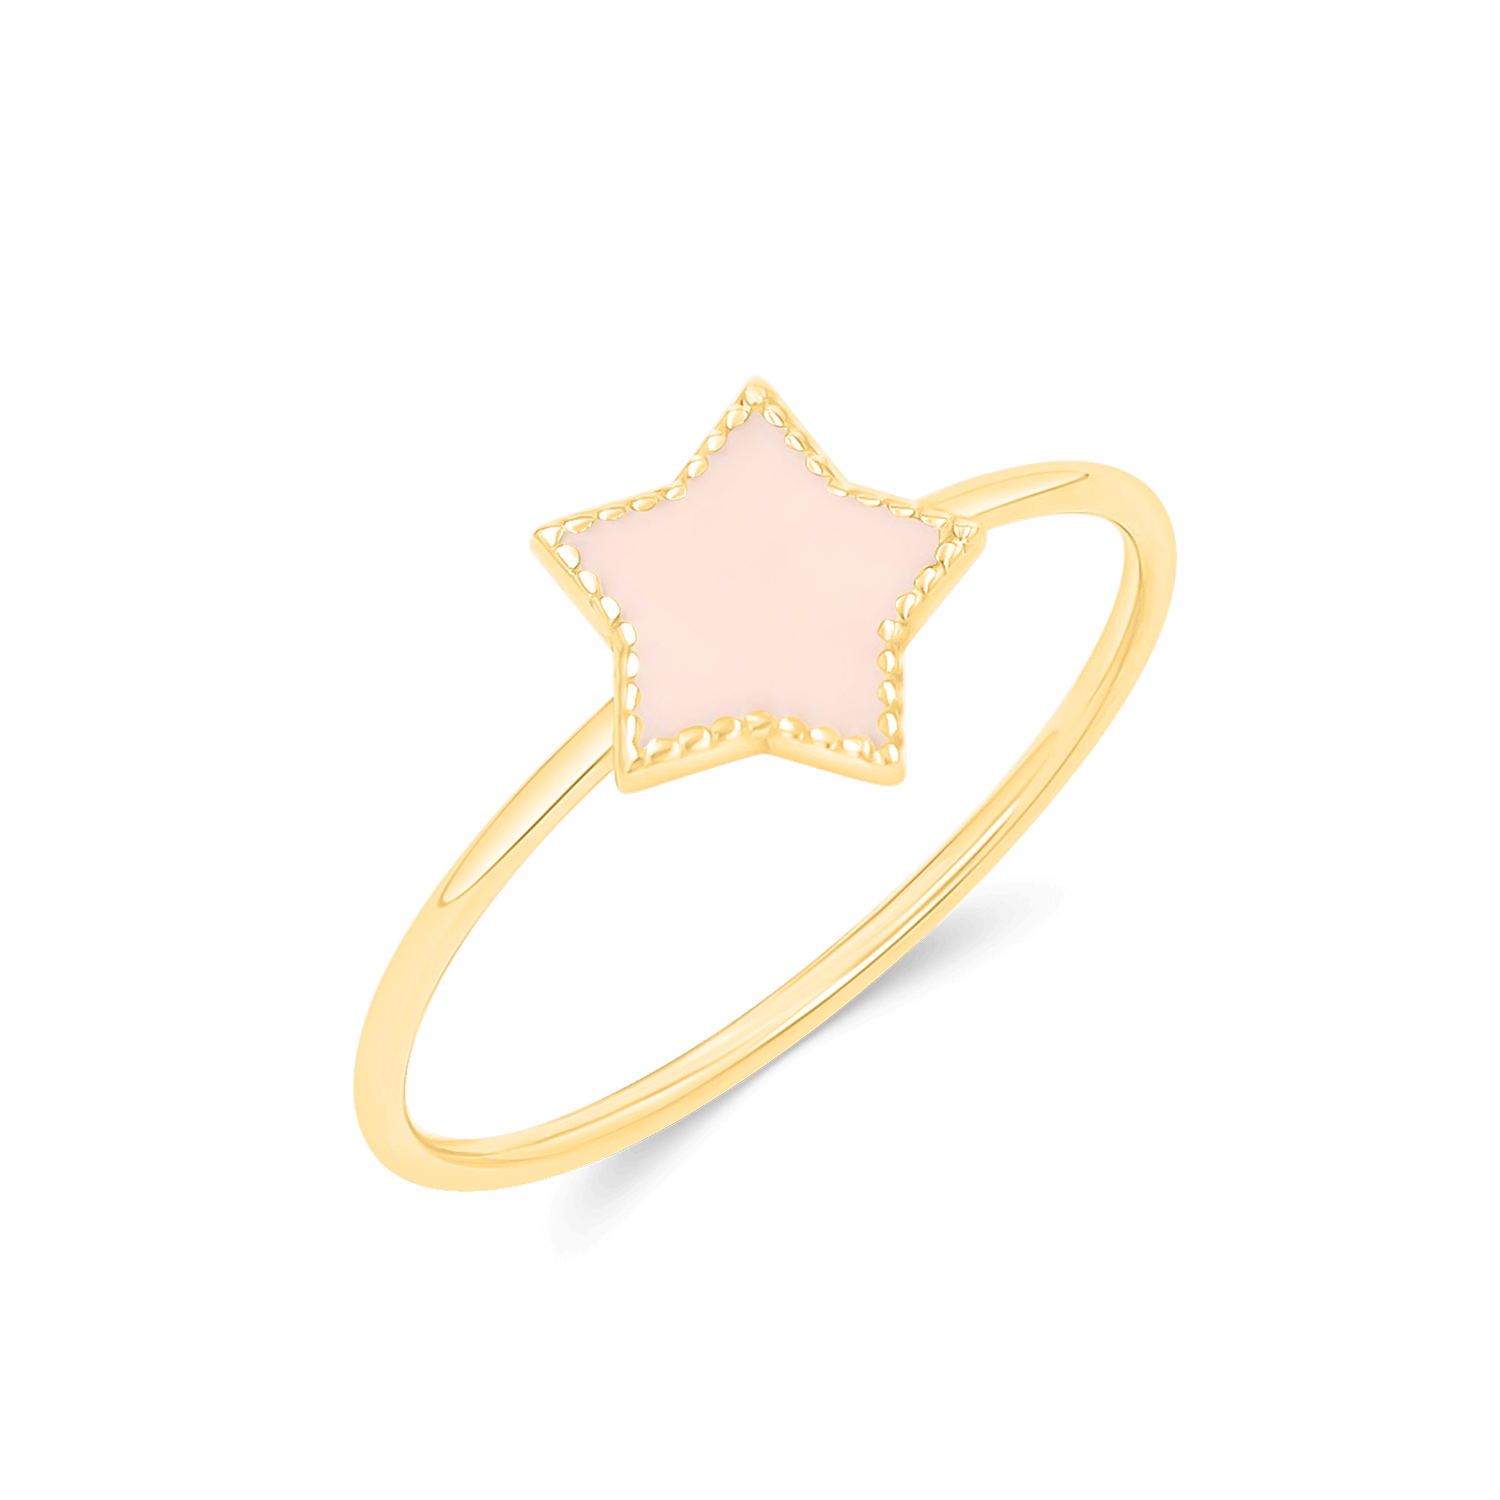 Enamel Star Ring 14K Yellow Gold / 8mm by Baby Gold - Shop Custom Gold Jewelry